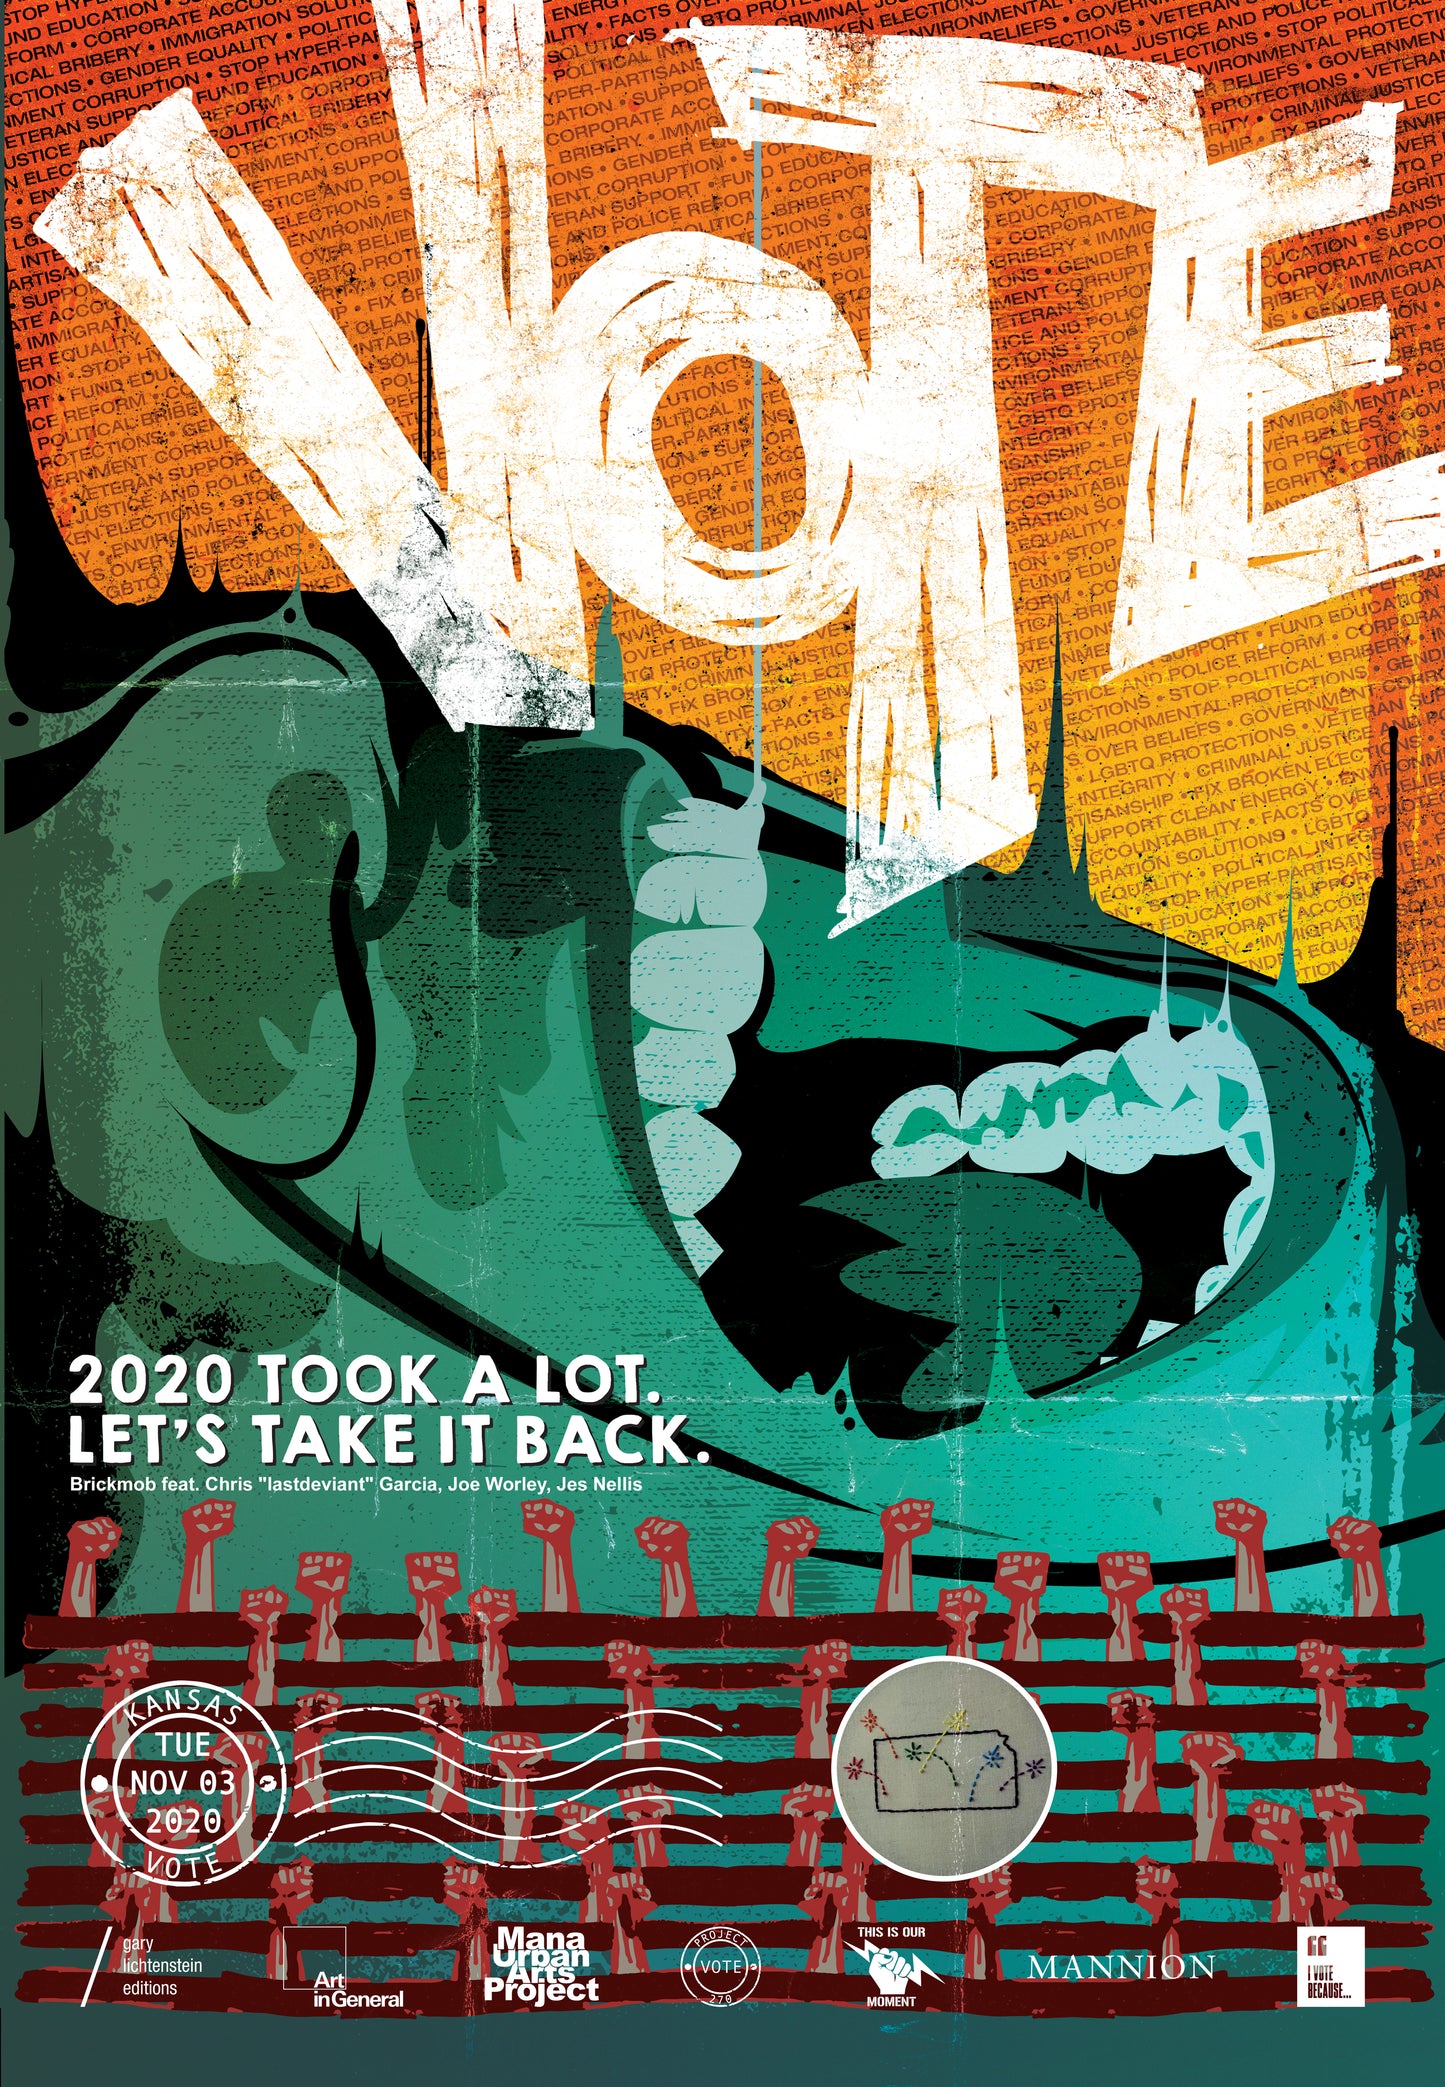 Kansas Get Out The Vote Poster by feat. Chris "lastdeviant" Garcia, Joe Worley, and Jes Nellis